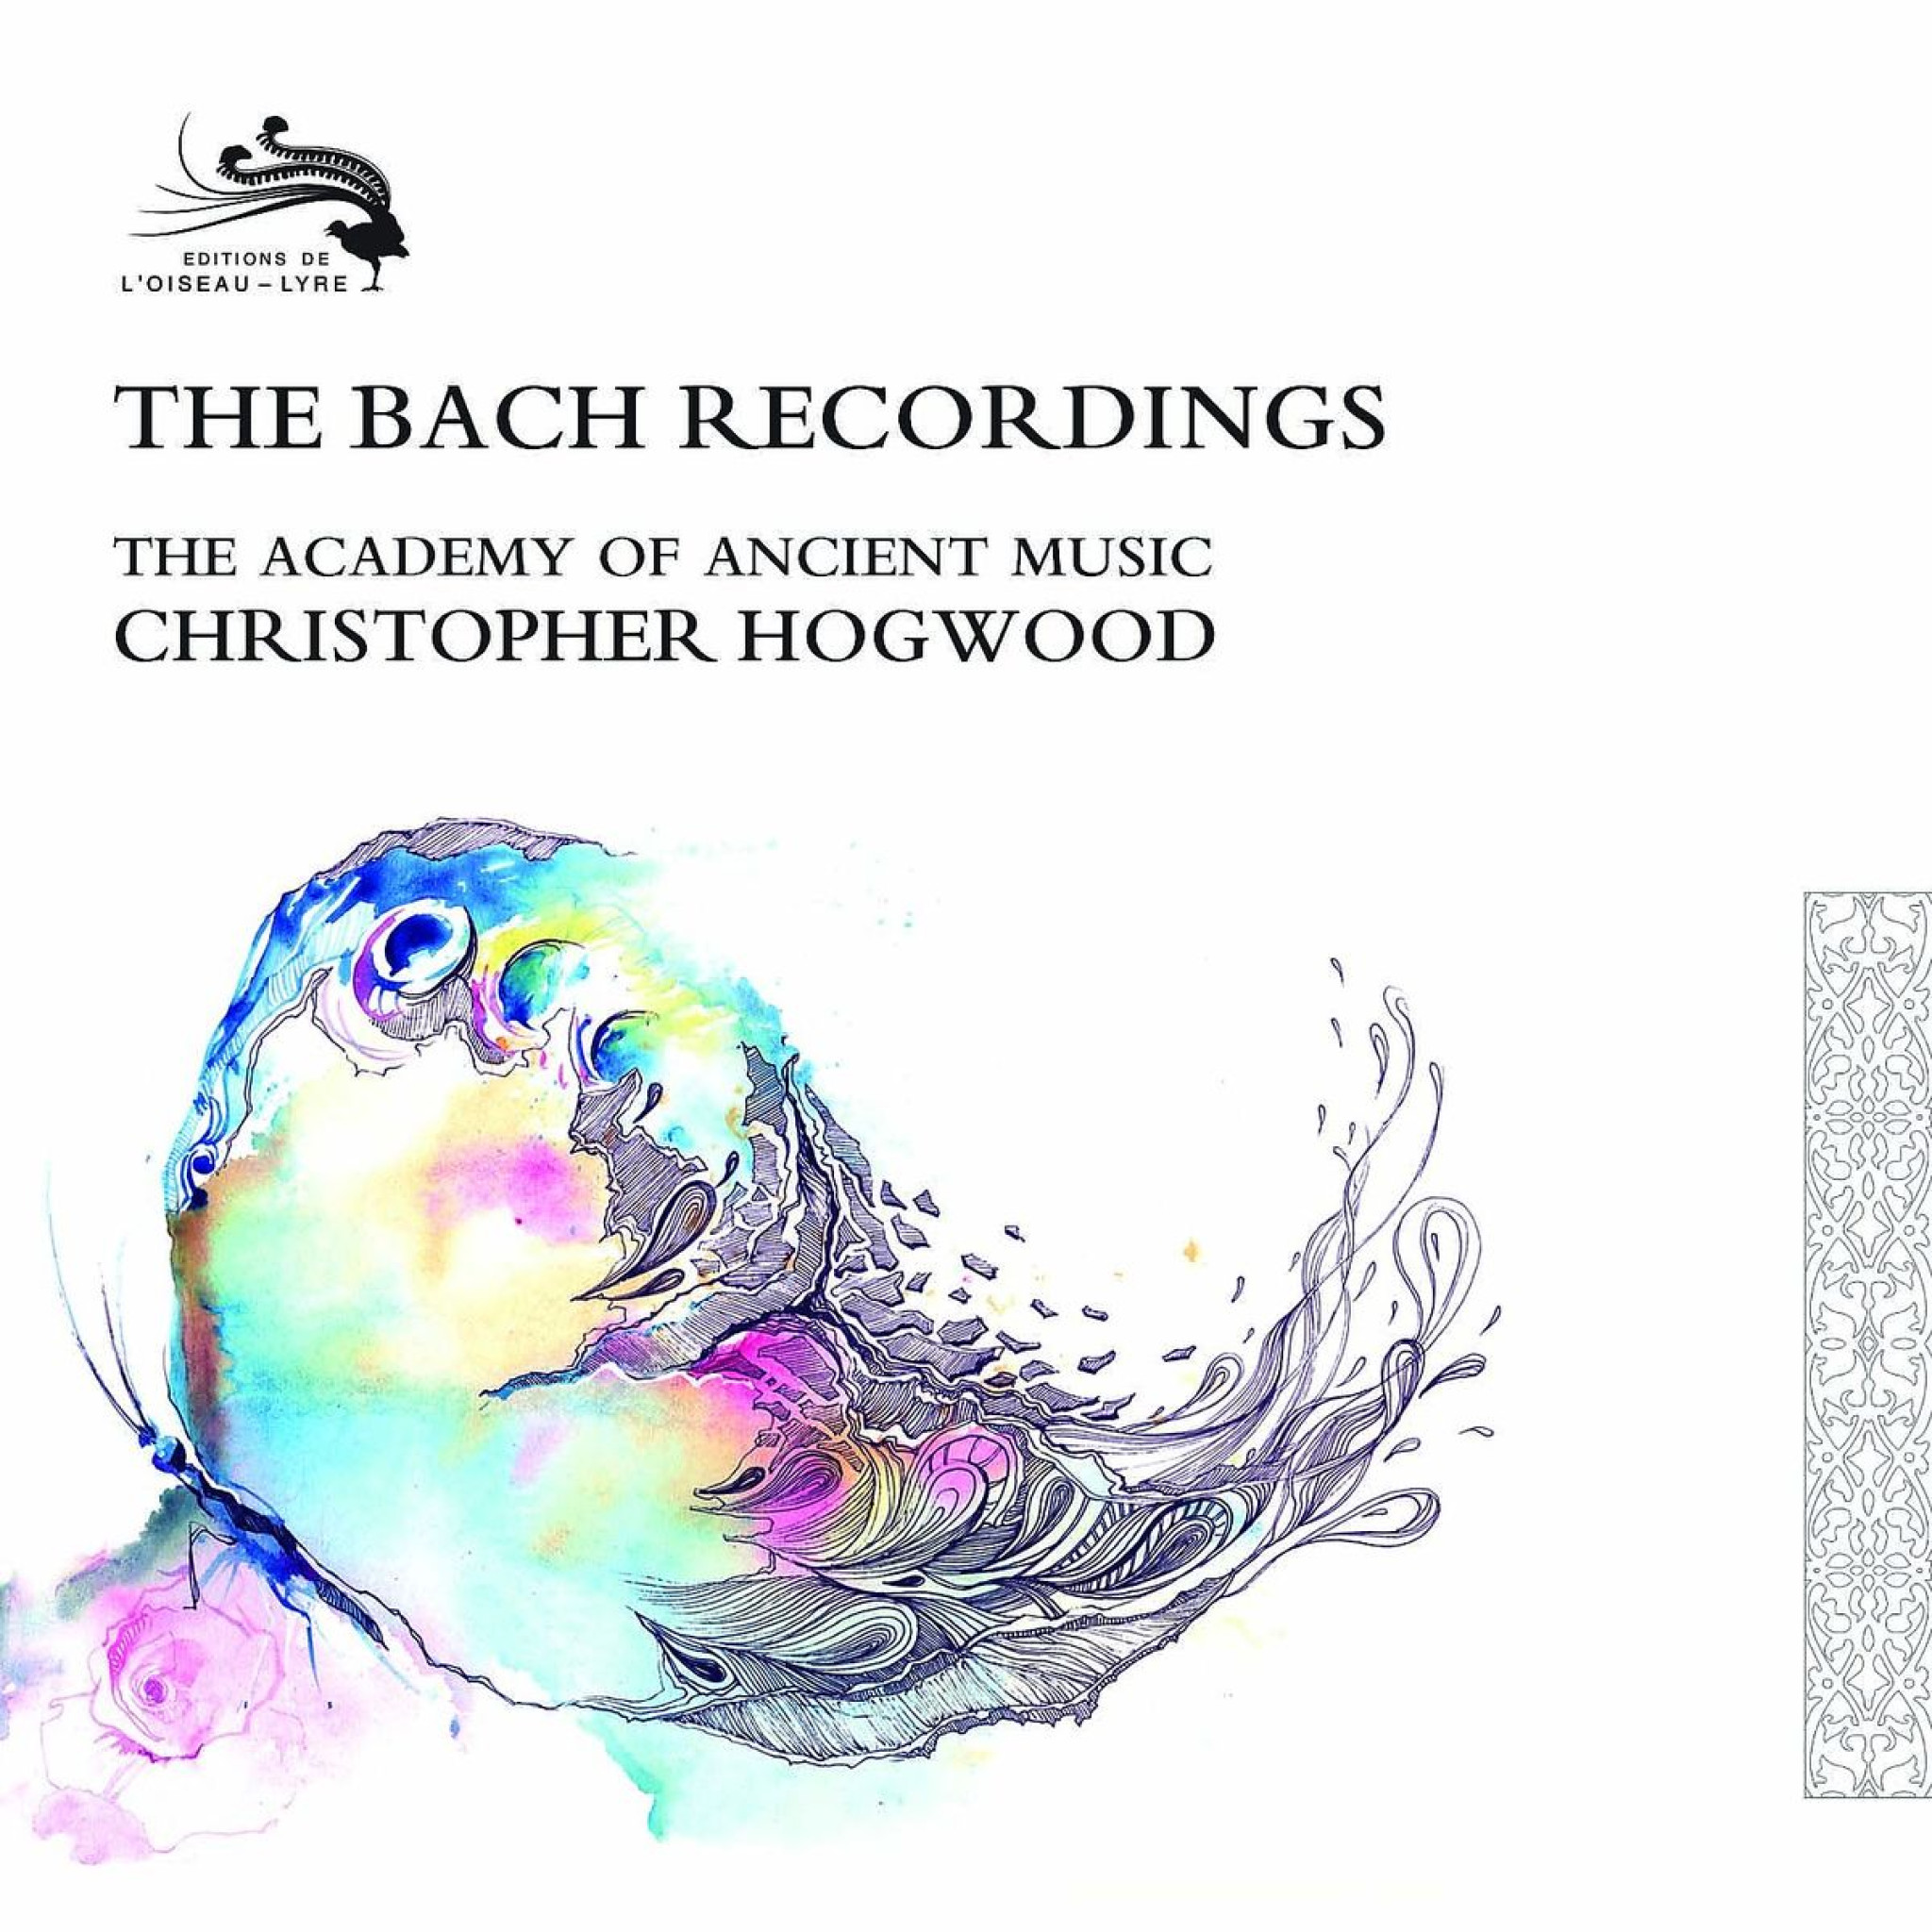 THE BACH RECORDINGS